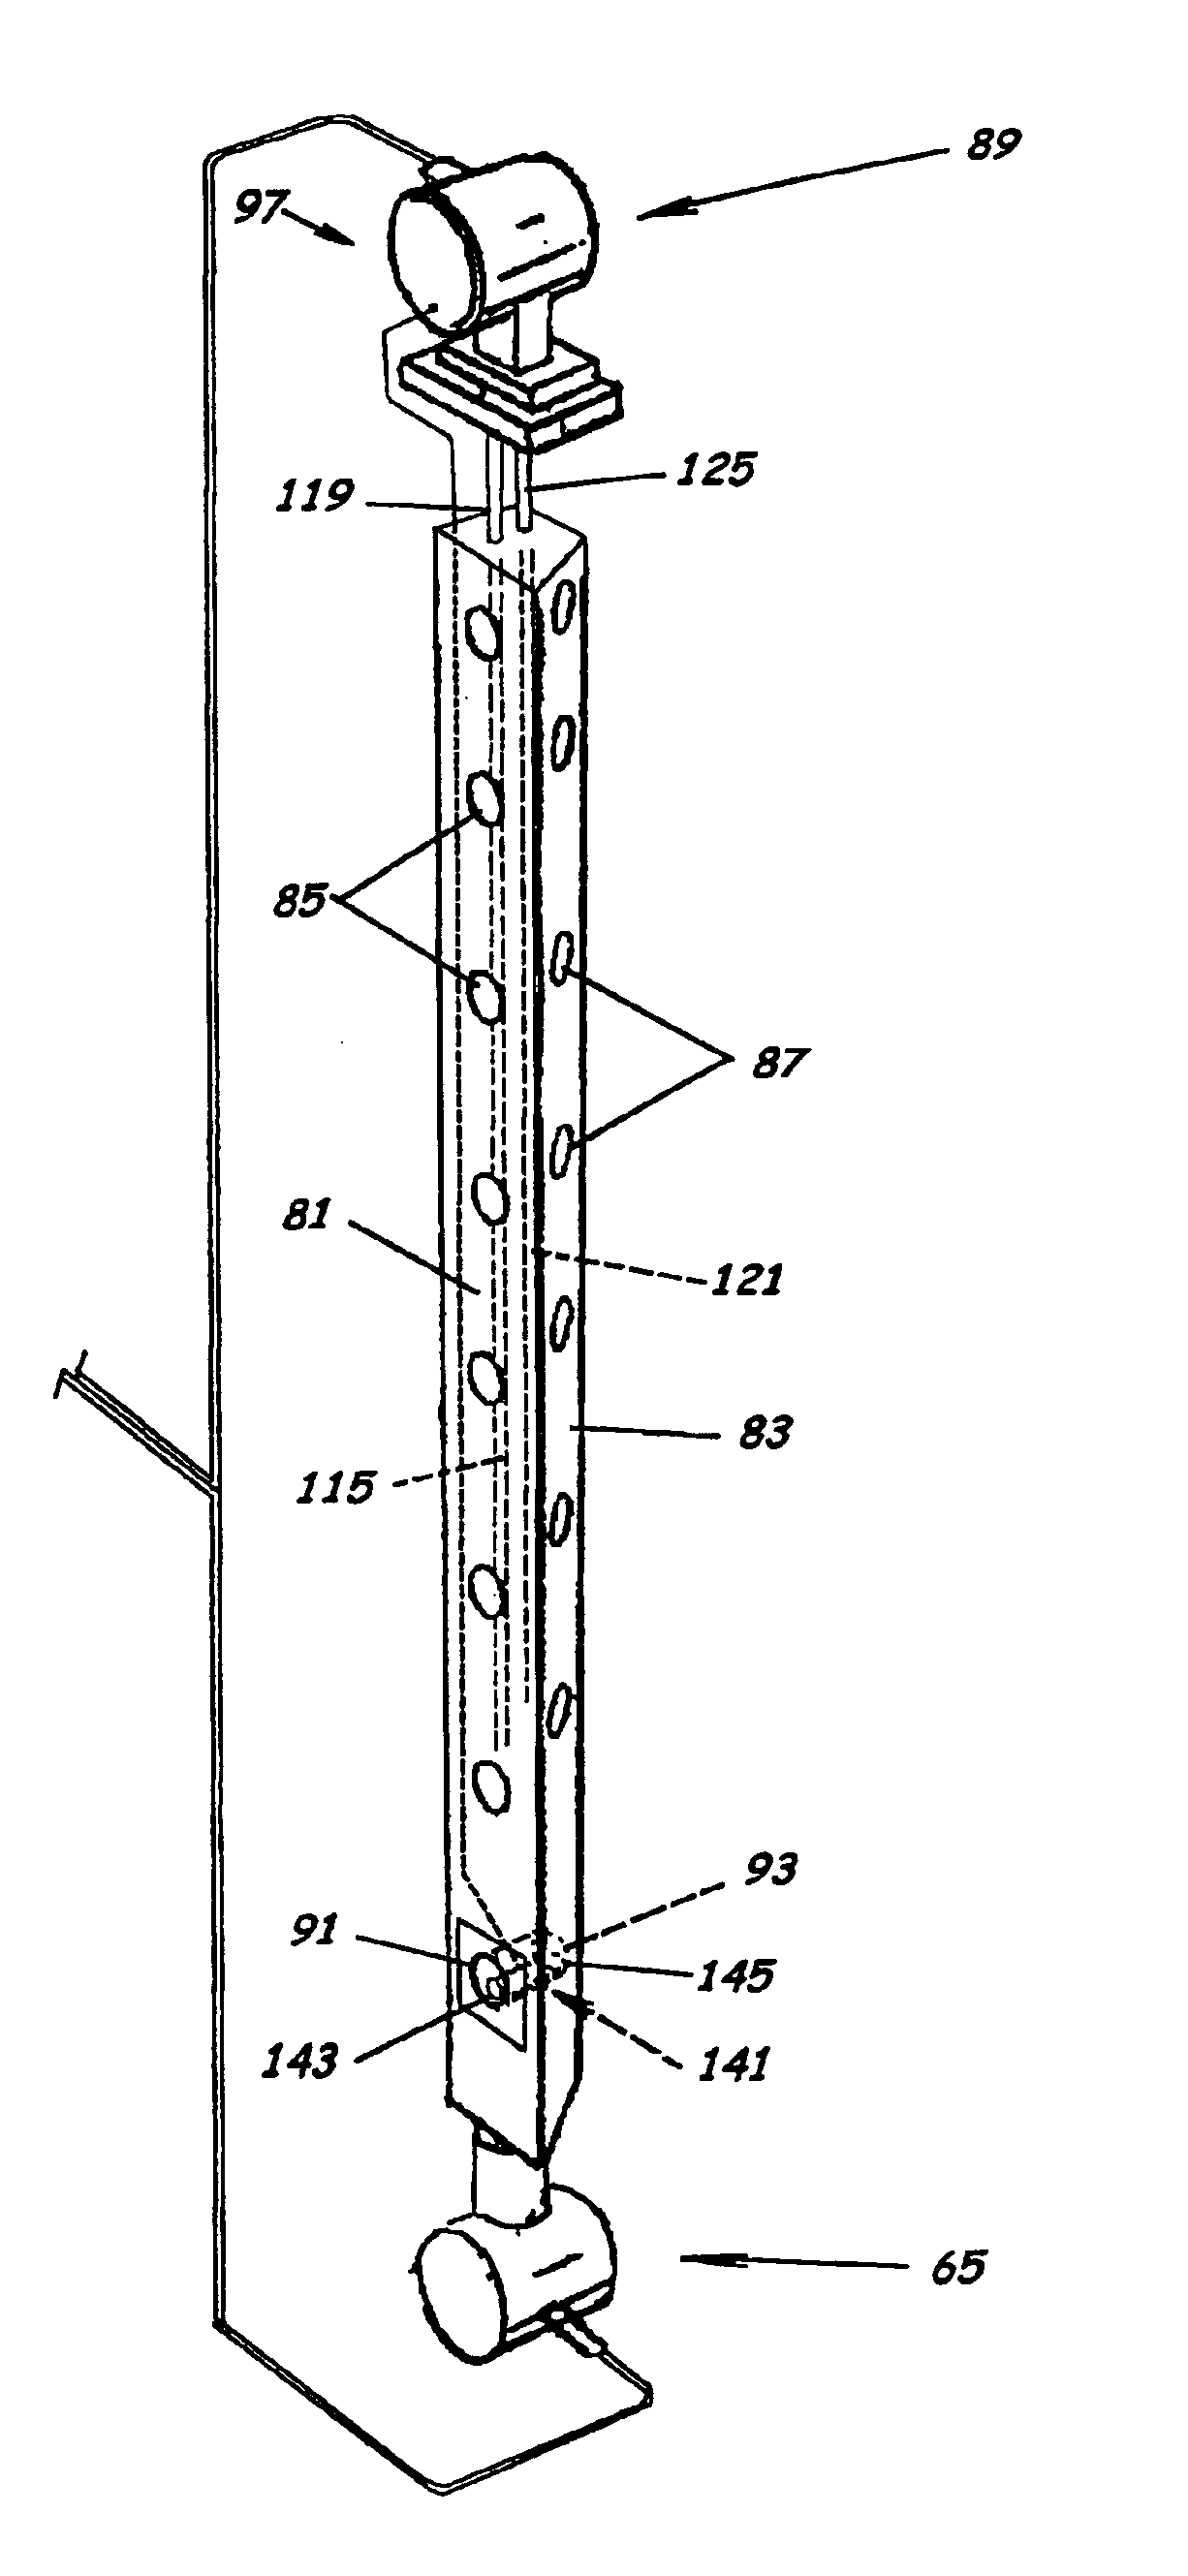 System to measure density, specific gravity, and flow rate of fluids, meter, and related methods